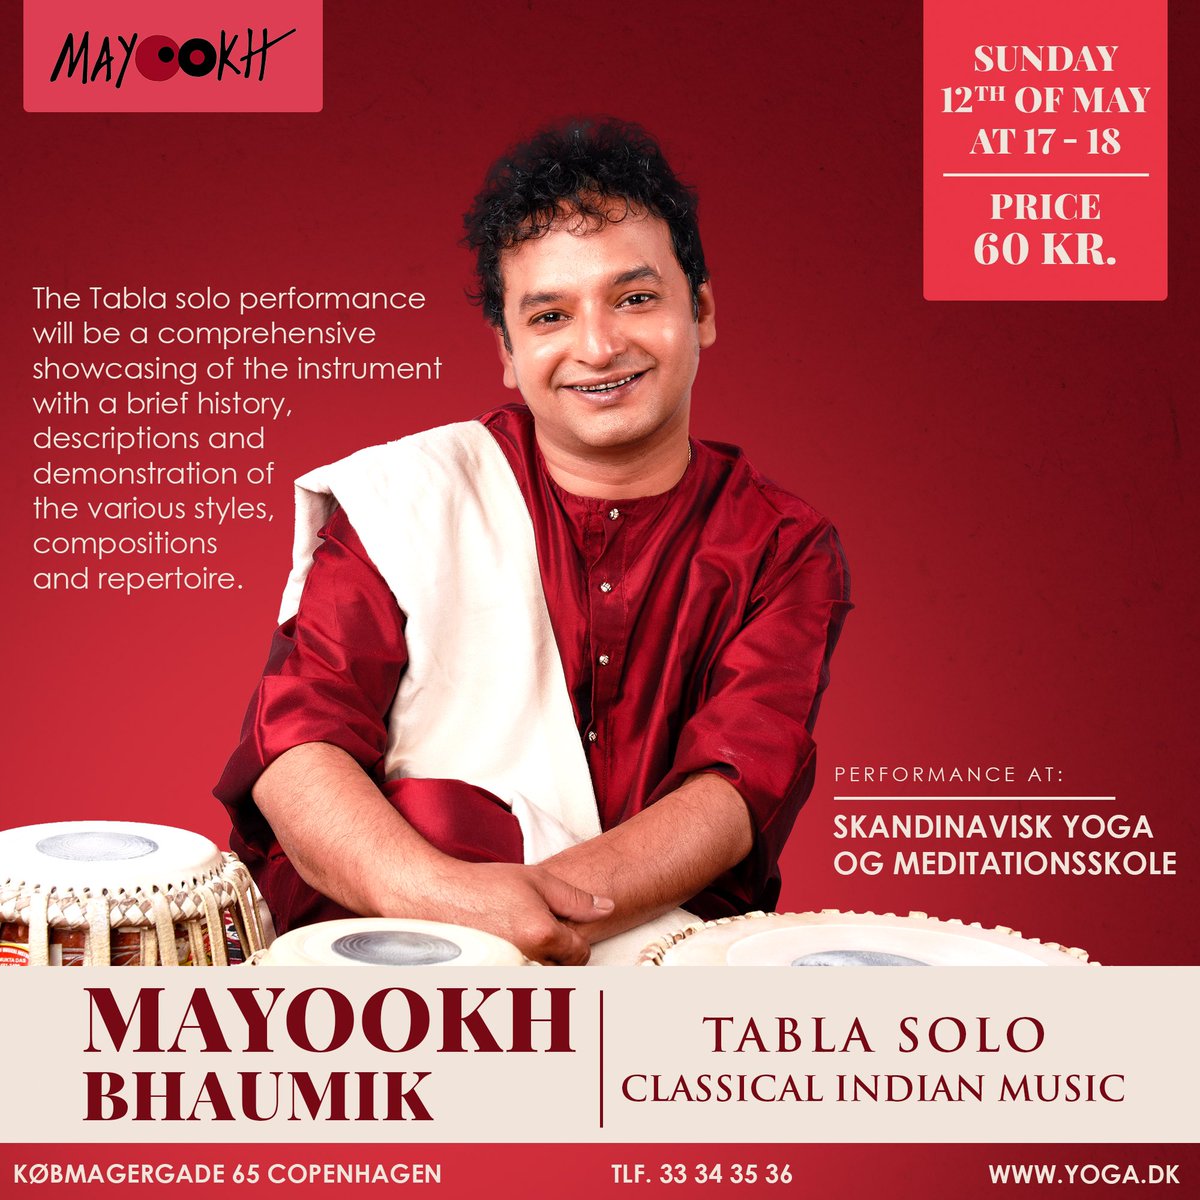 Super excited for the Tabla Solo concert tonight in Copenhagen - see you all there tonight at 5 pm. 
.
.
.
#tablasolo #mayookhbhaumik #mayookh #mayookhlive #tabla #concert #copenhagen #denmark #europe #indianclassicalmusic #tonight #classicalmusic